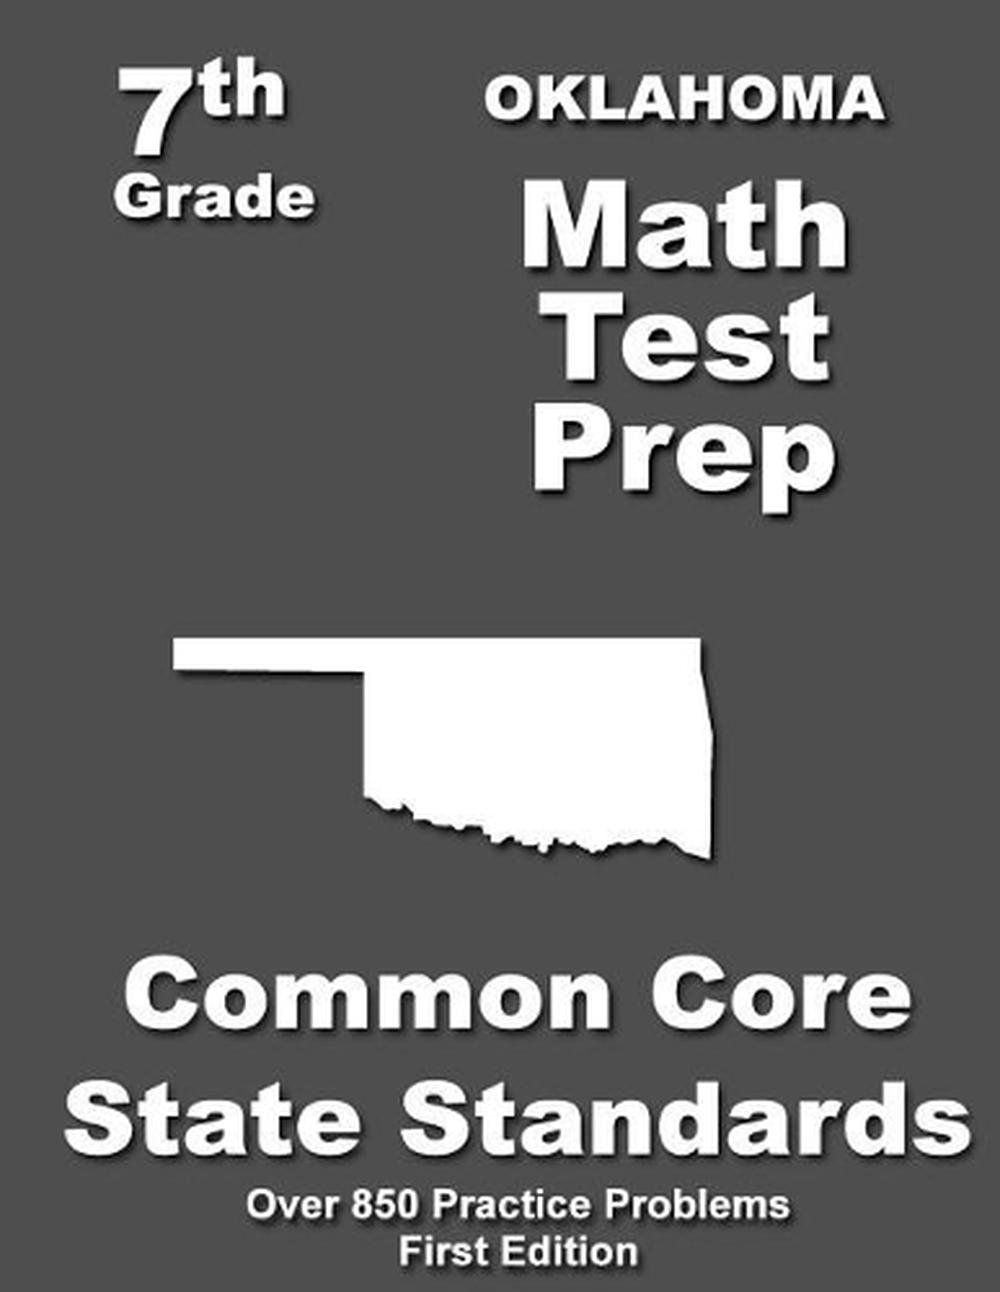 Oklahoma 7th Grade Math Test Prep Common Core Learning Standards by